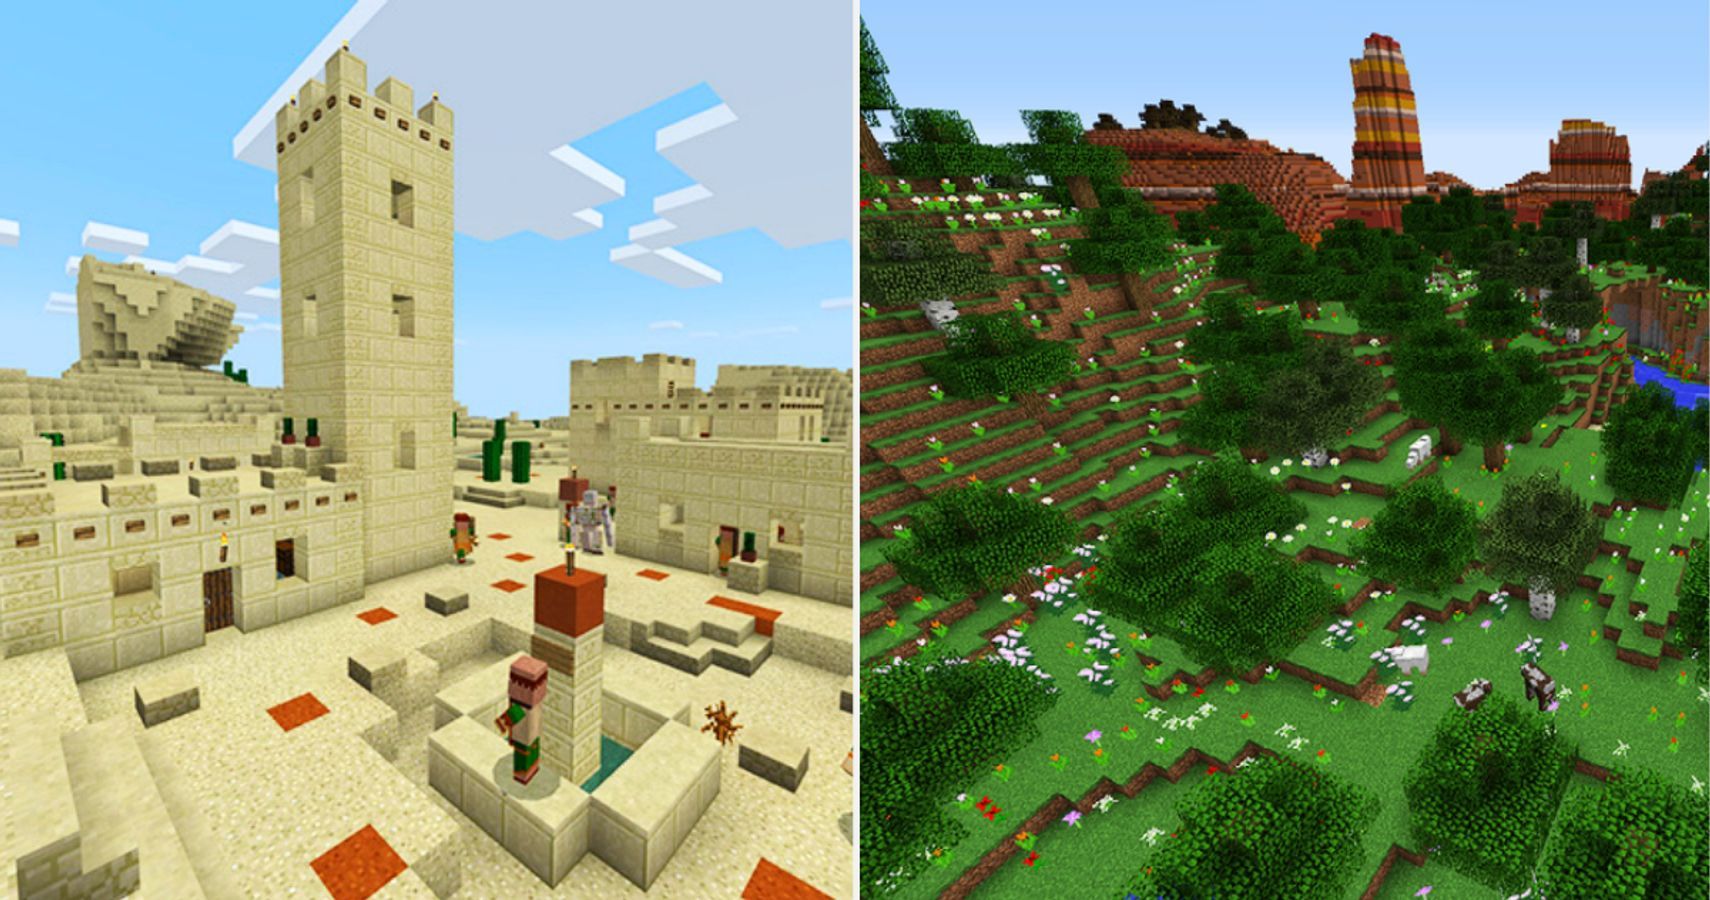 5 best Minecraft 1.19 biomes for building survival bases